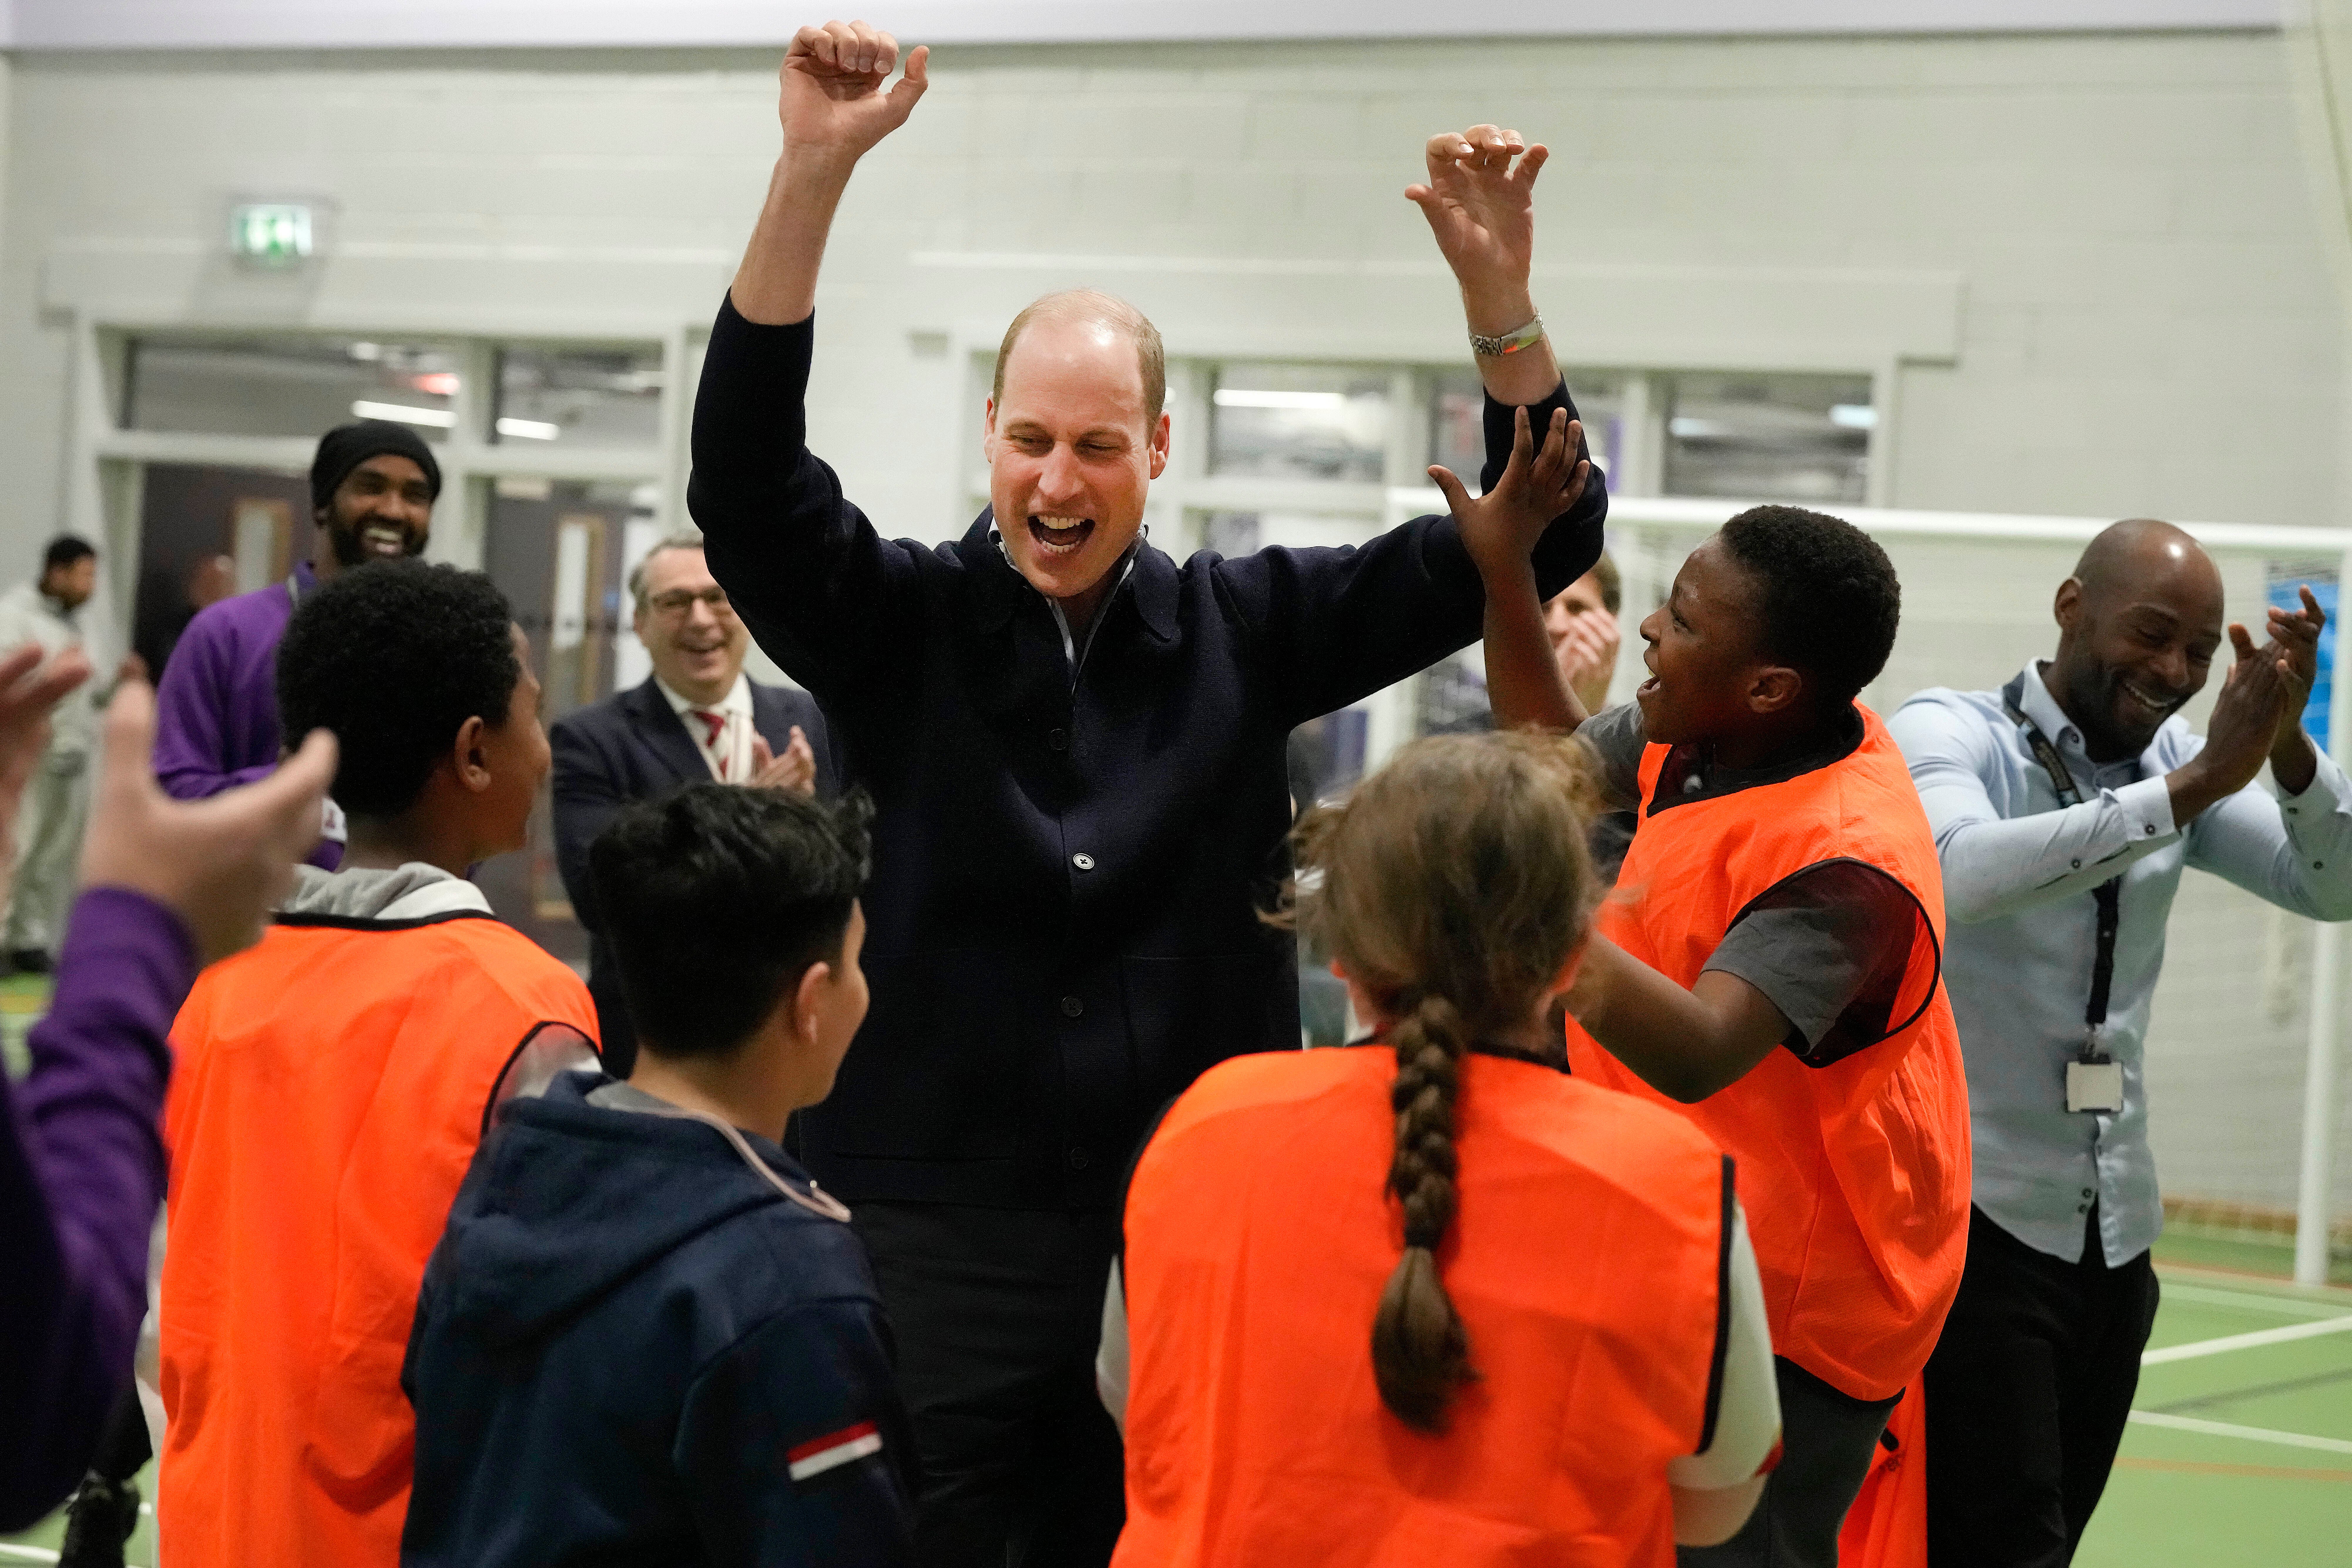 The Prince of Wales celebrates with young people after he threw a basket, during a visit to WEST, the new OnSide charity youth zone in Hammersmith and Fulham